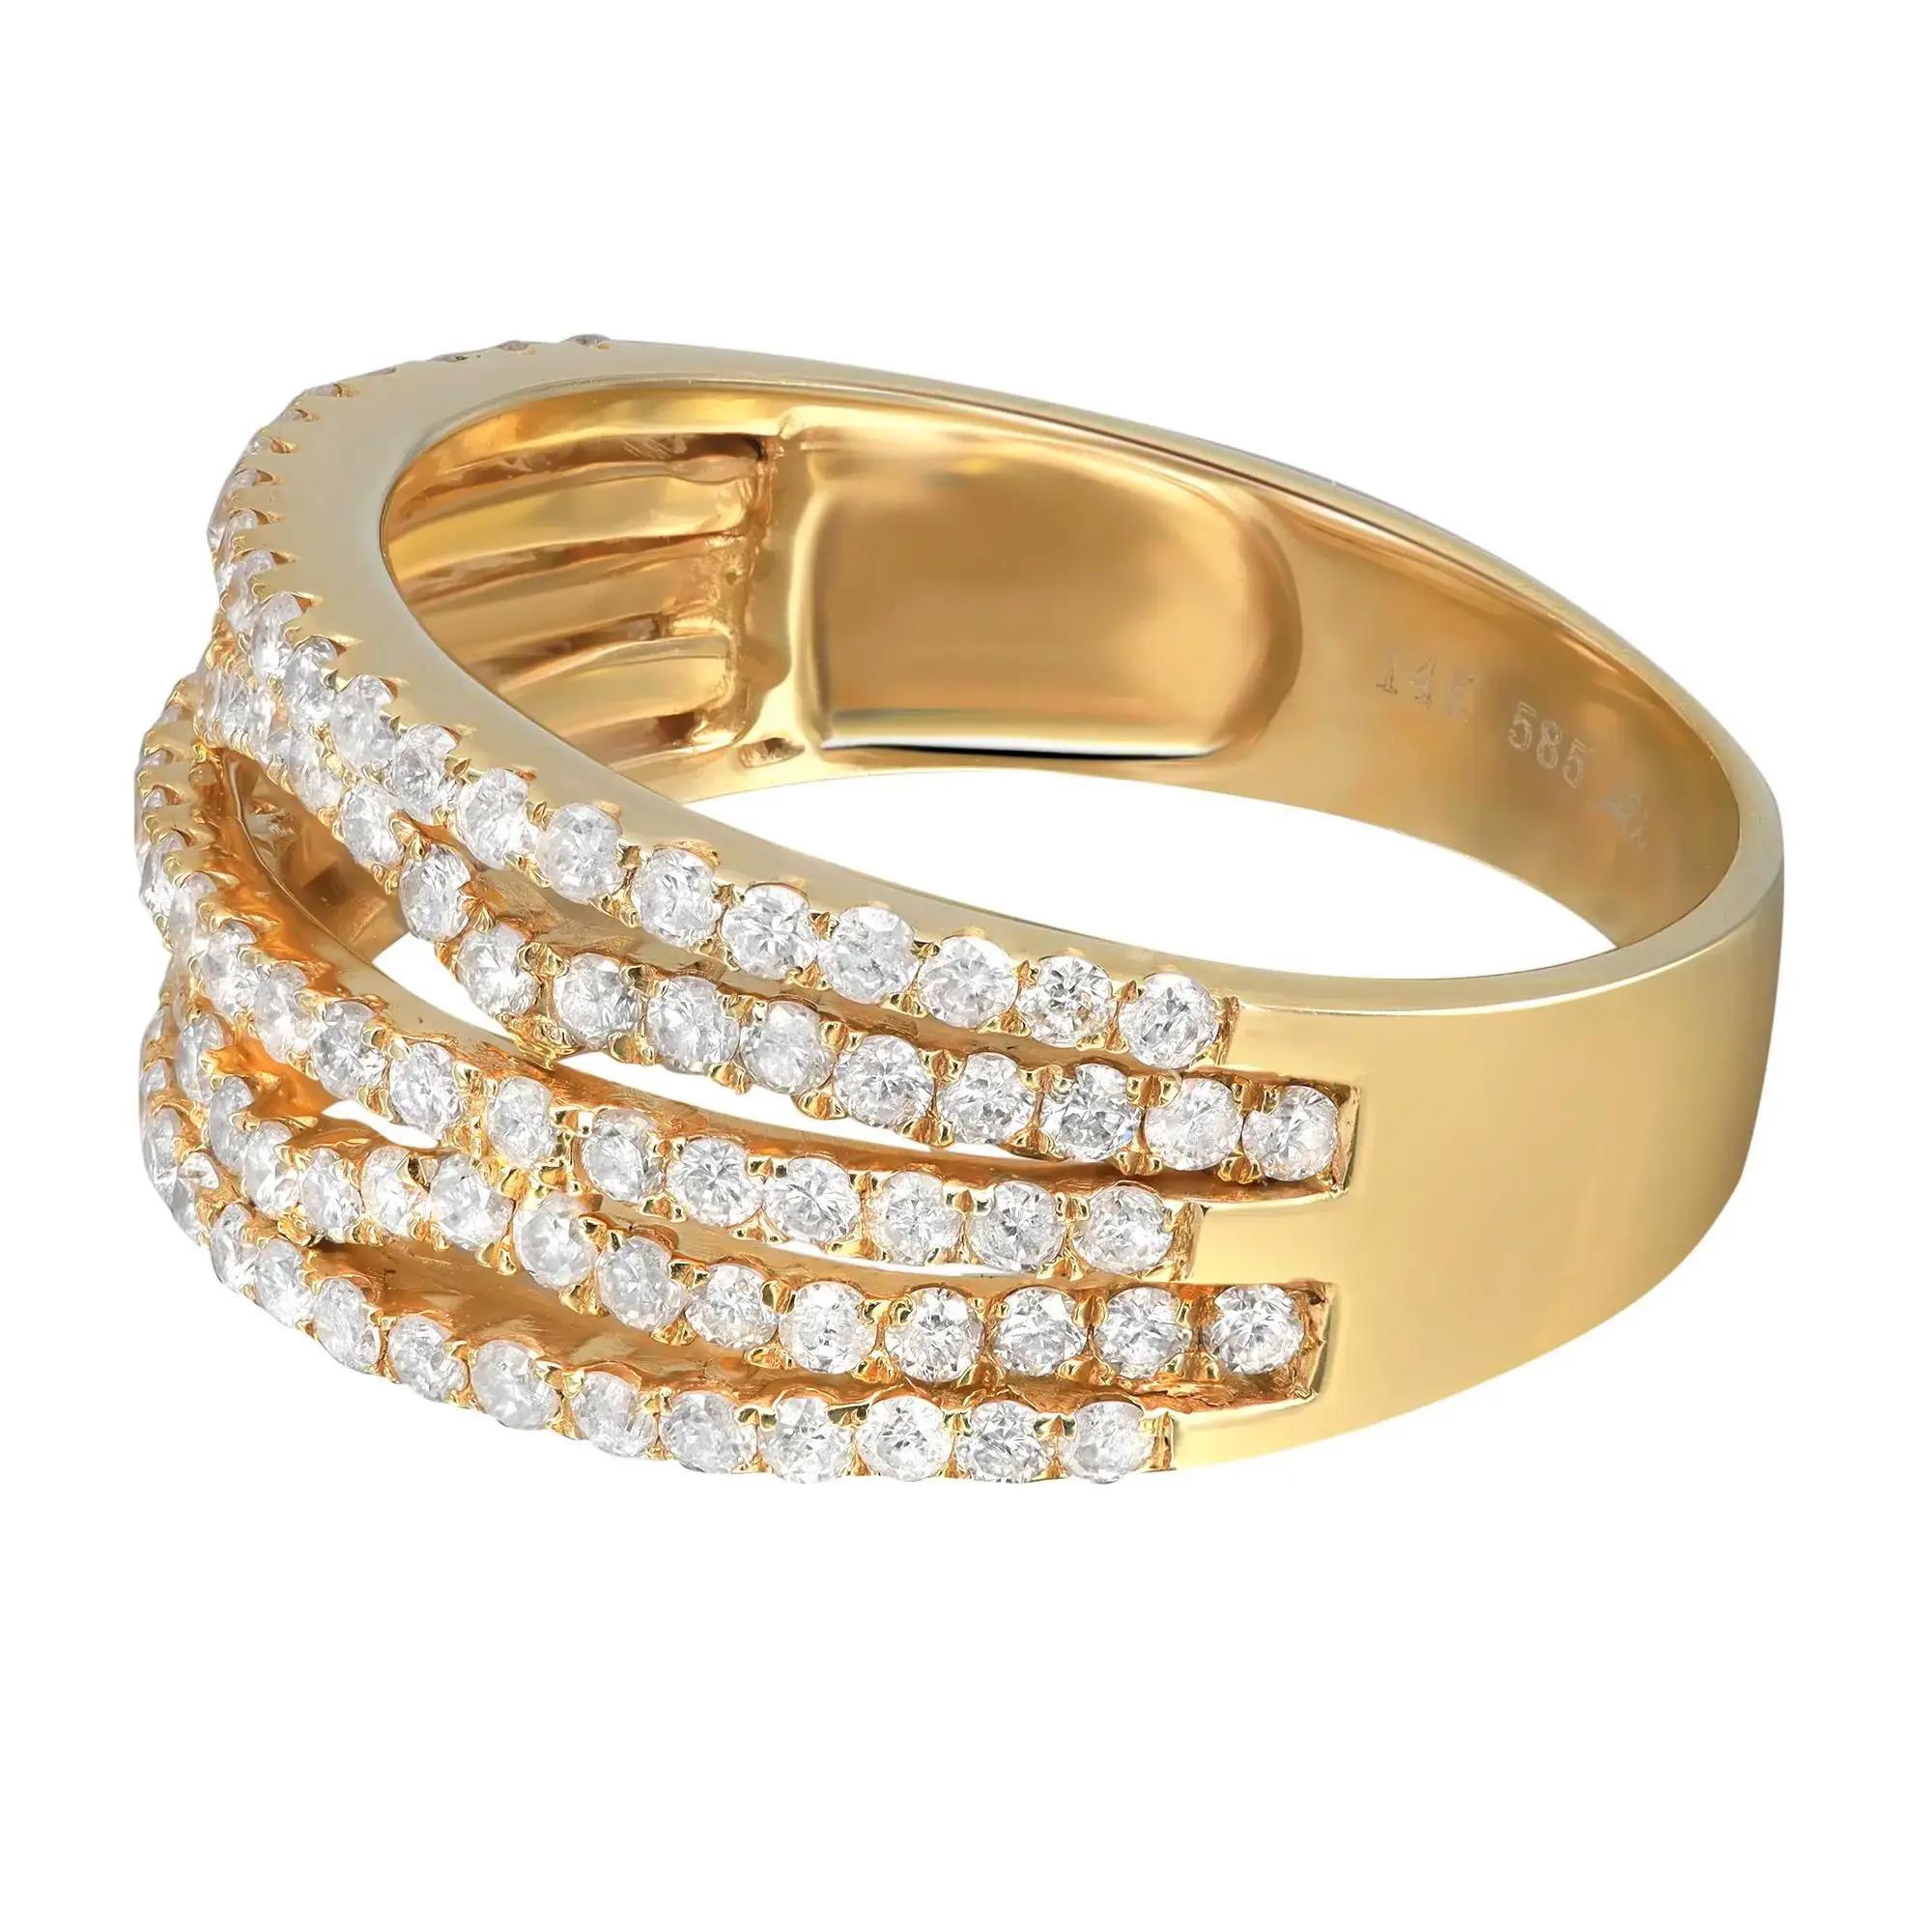 This elegant and classic diamond band ring is crafted in 14k yellow gold. Features multiple rows of prong set round brilliant cut diamonds weighing 1.03 carats. Ring width: 9.3 mm. Ring size: 7.5. Total weight: 4.13 grams. A great addition to your